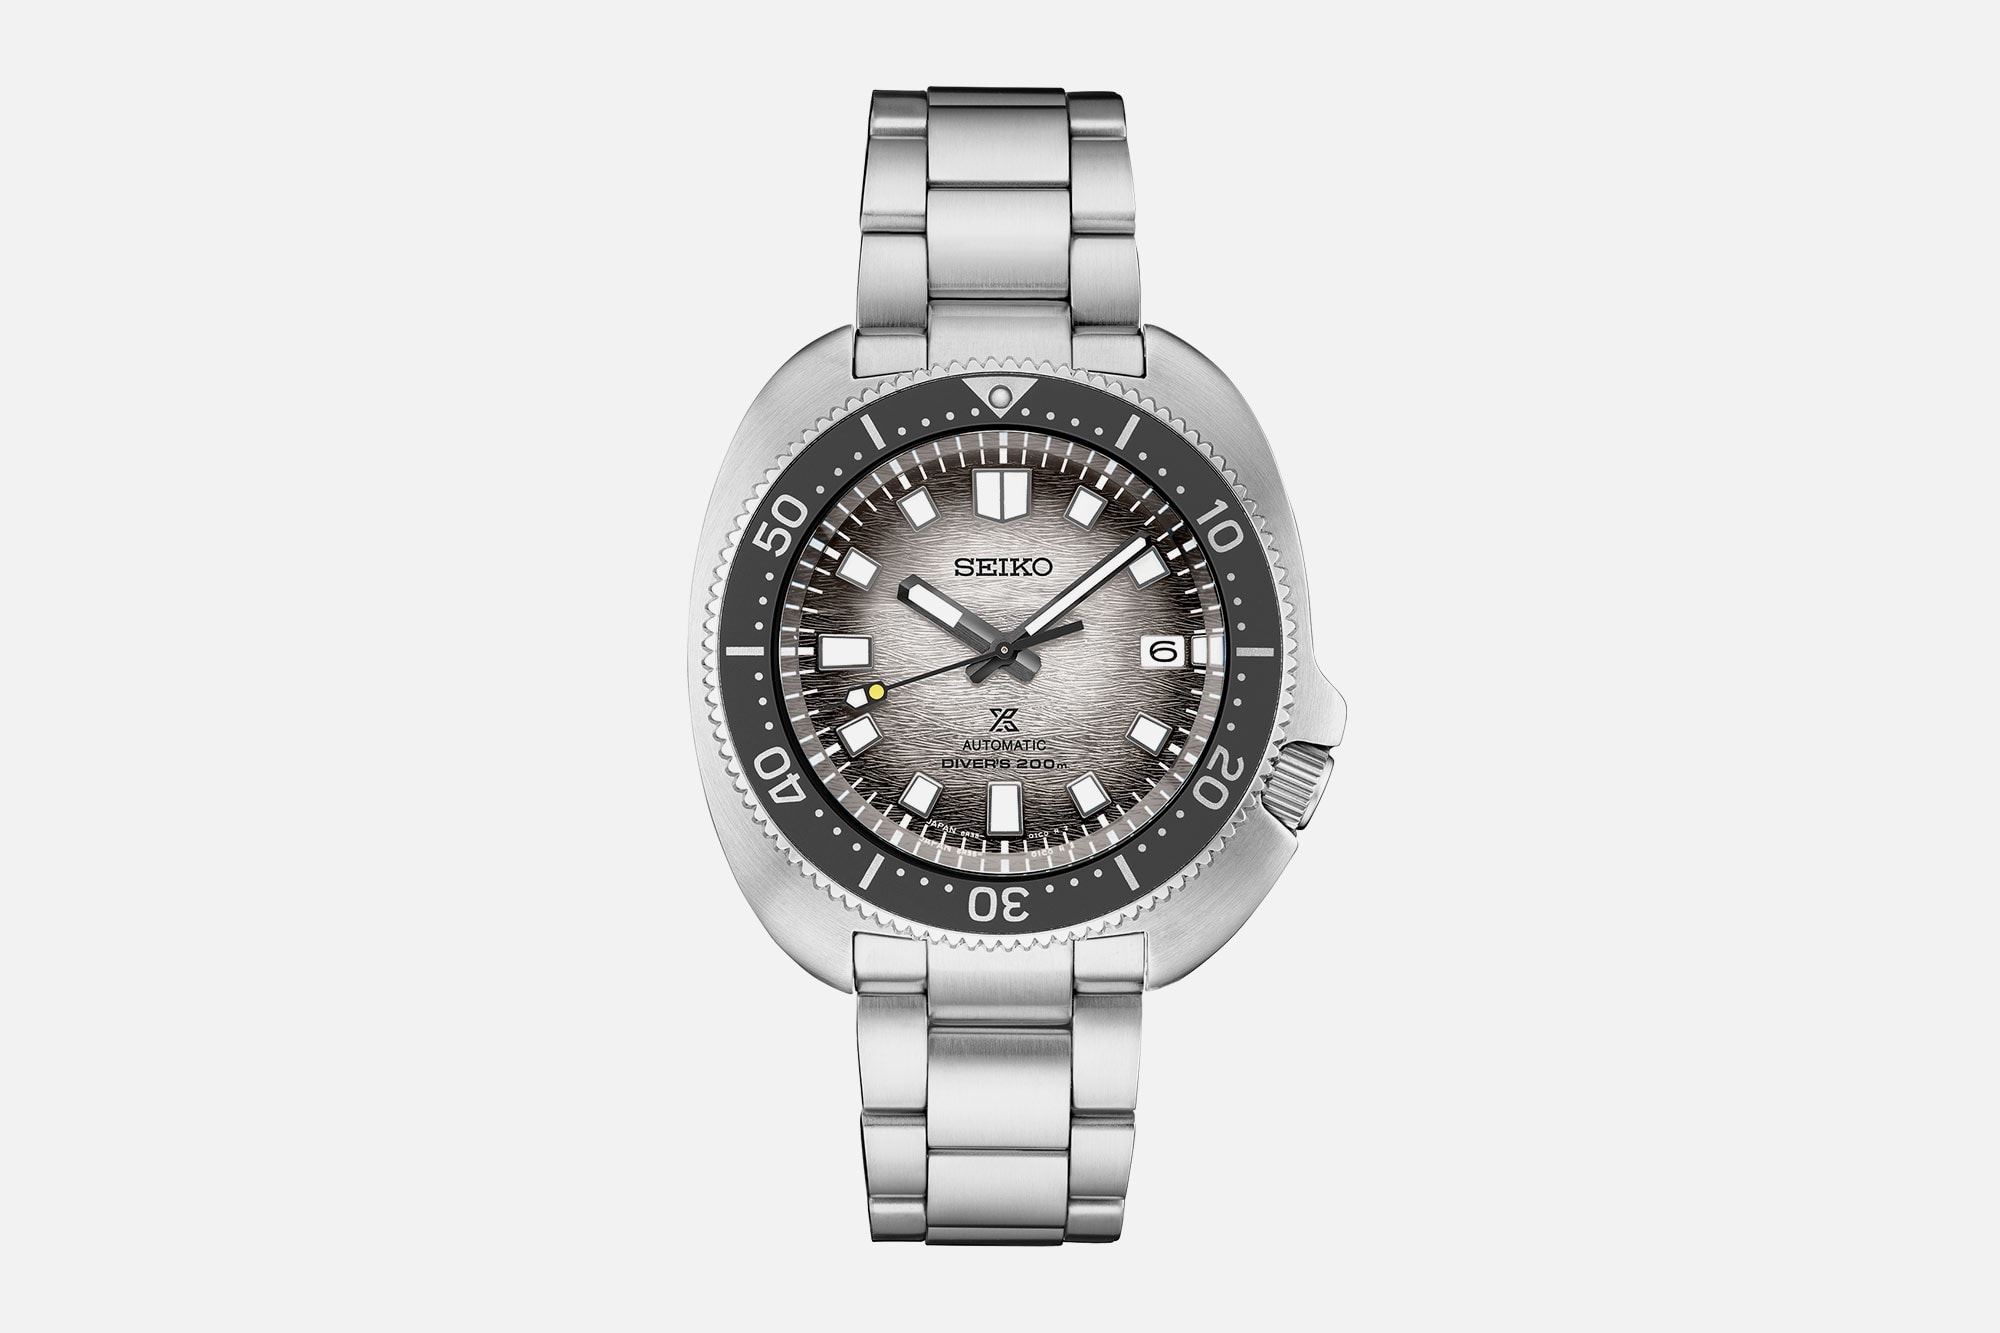 The Seiko Ice Diver is Back in a New Series Inspired by Antarctic Exploration and Naomi Uemura